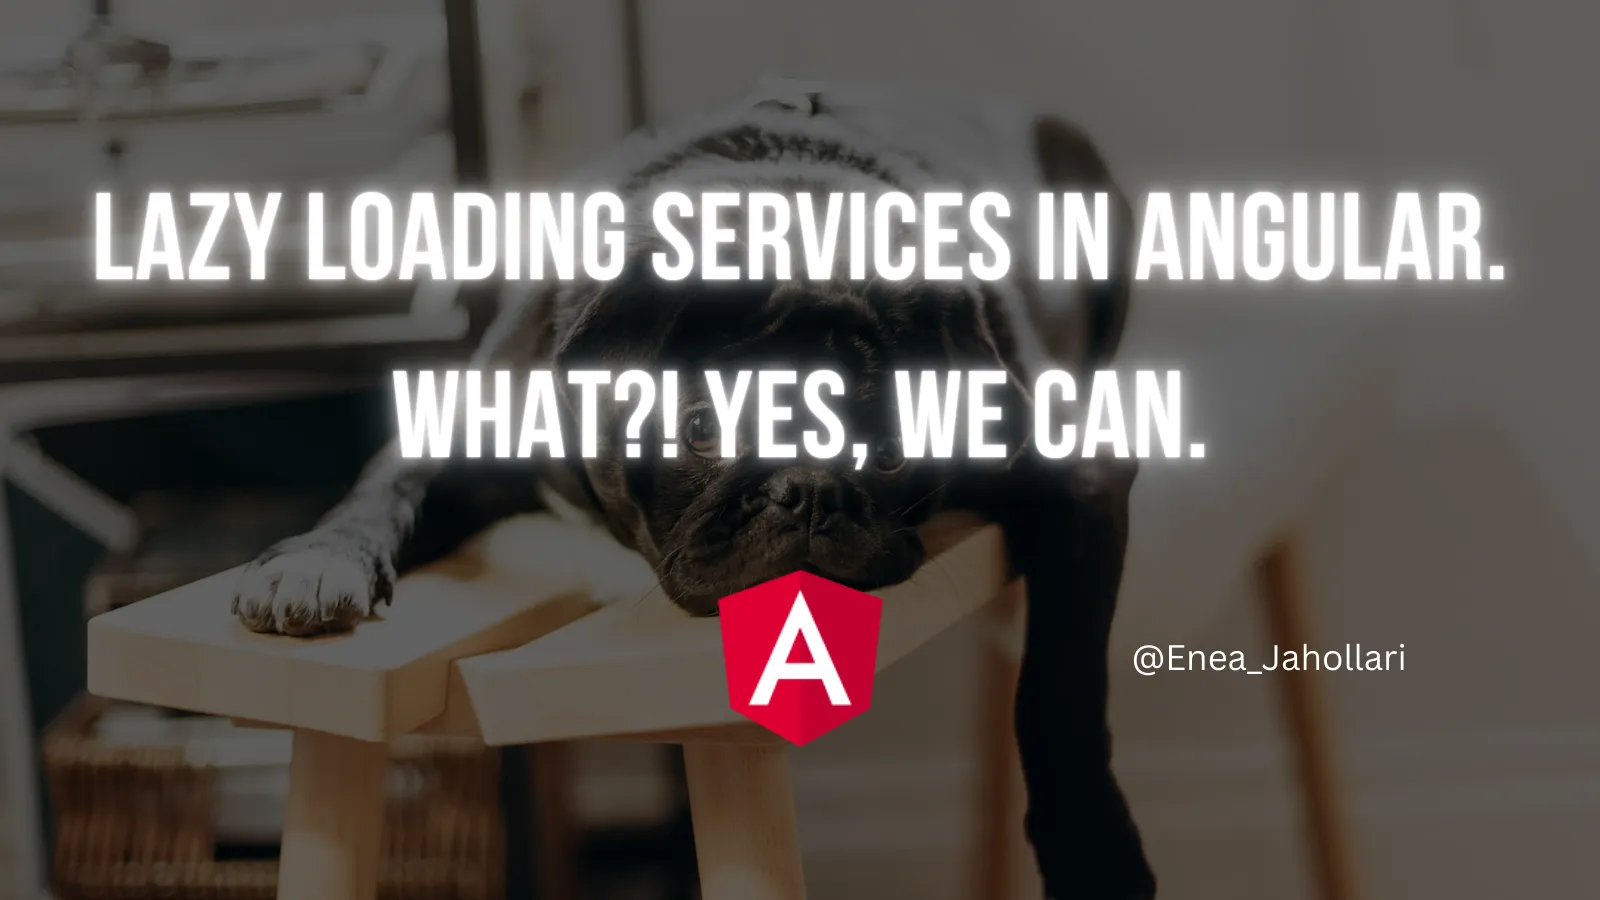 We’re used to lazy loading modules or components in Angular. But what about lazy loading services? Wait, what? Yes, we can. In this article, we will learn how to lazy load a service in Angular and it’s gotchas.